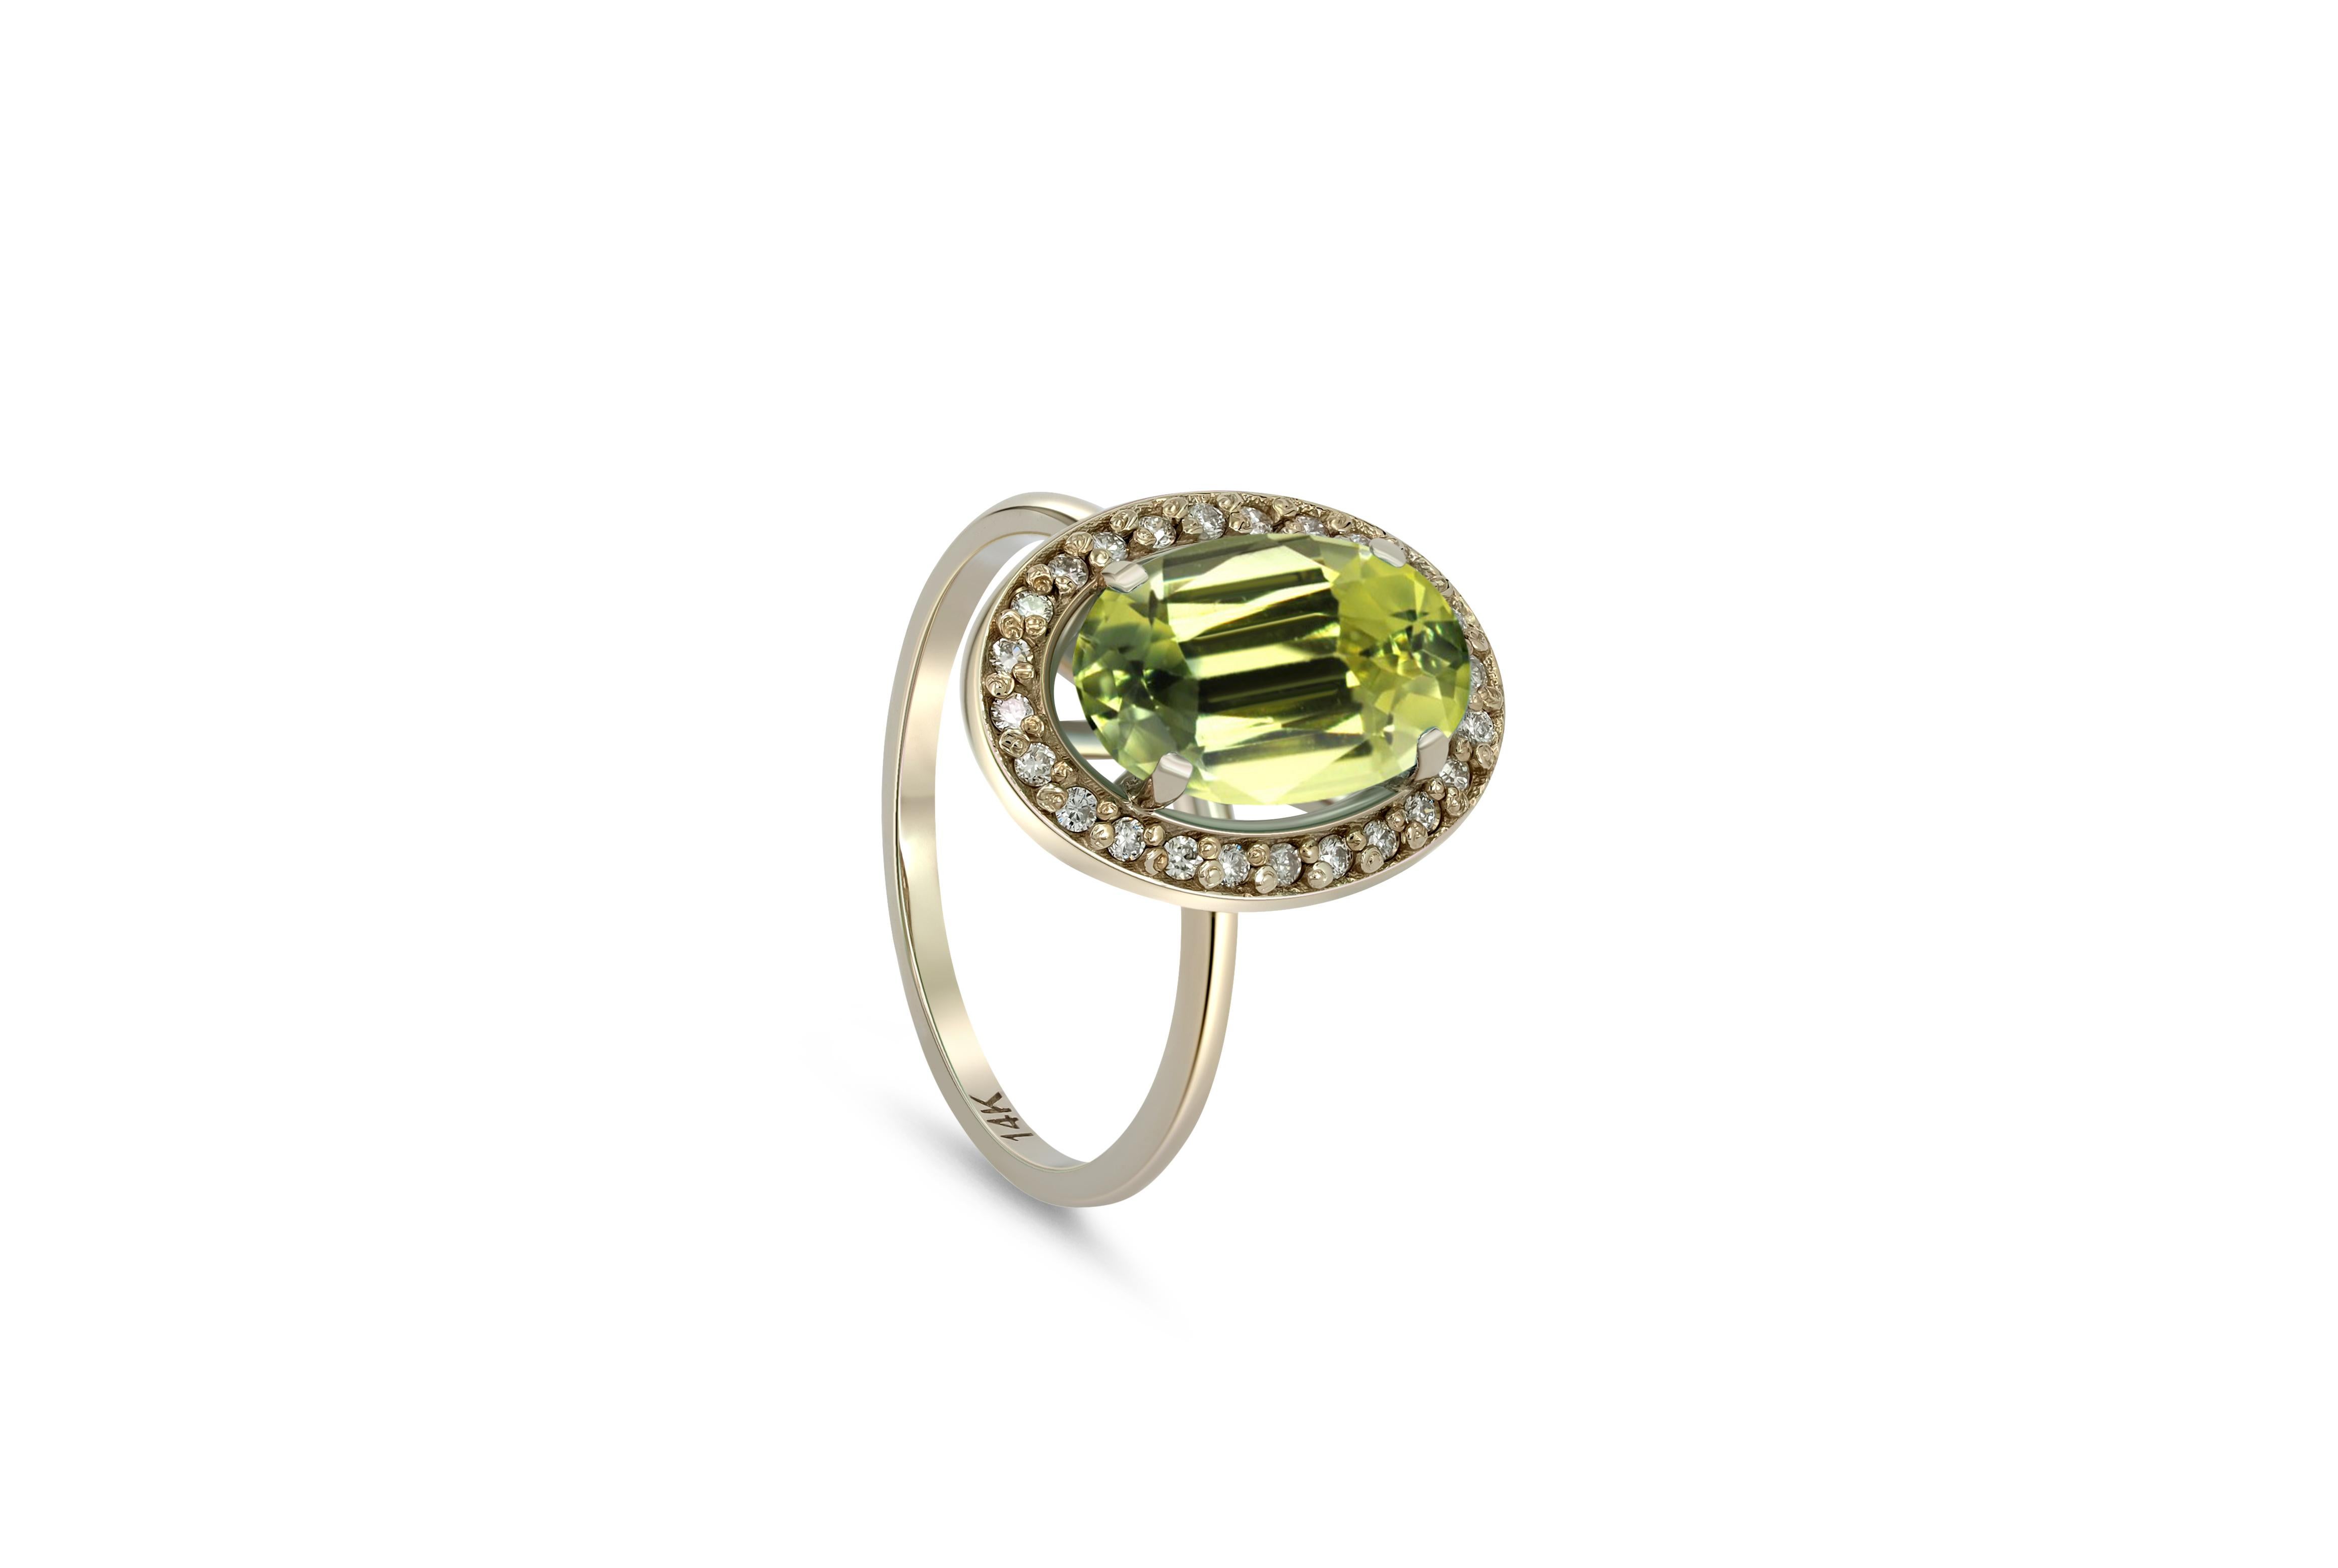 For Sale:  Peridot and diamonds 14k gold ring. 2